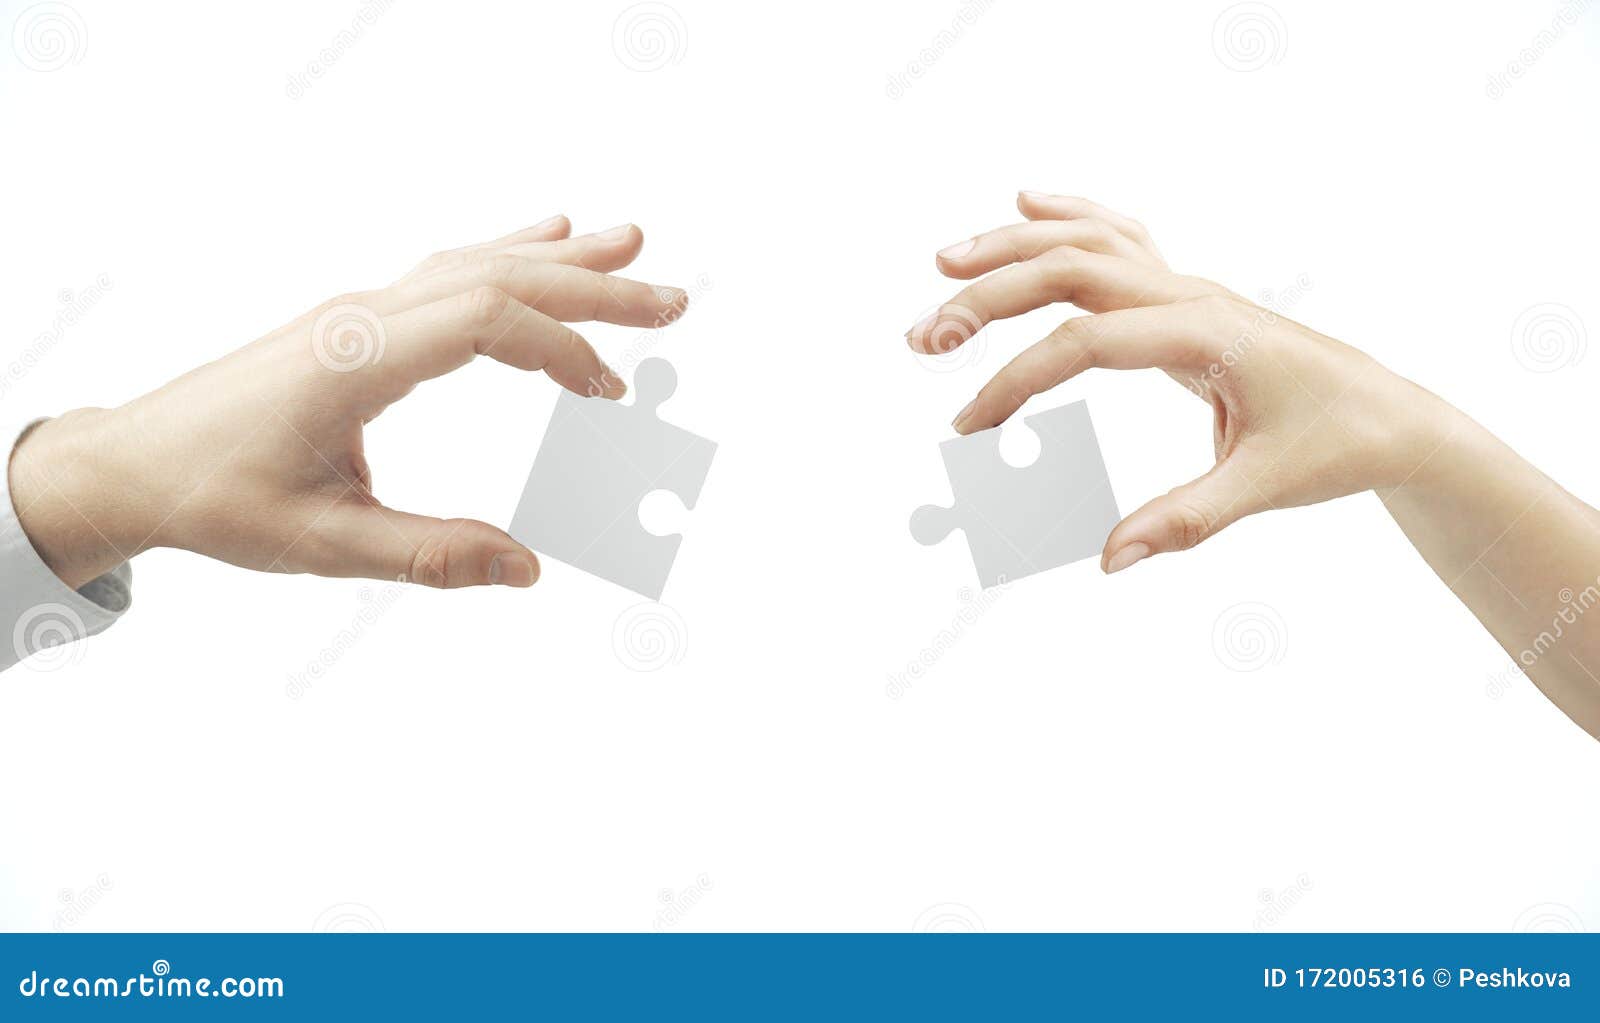 hands putting puzzle pieces together